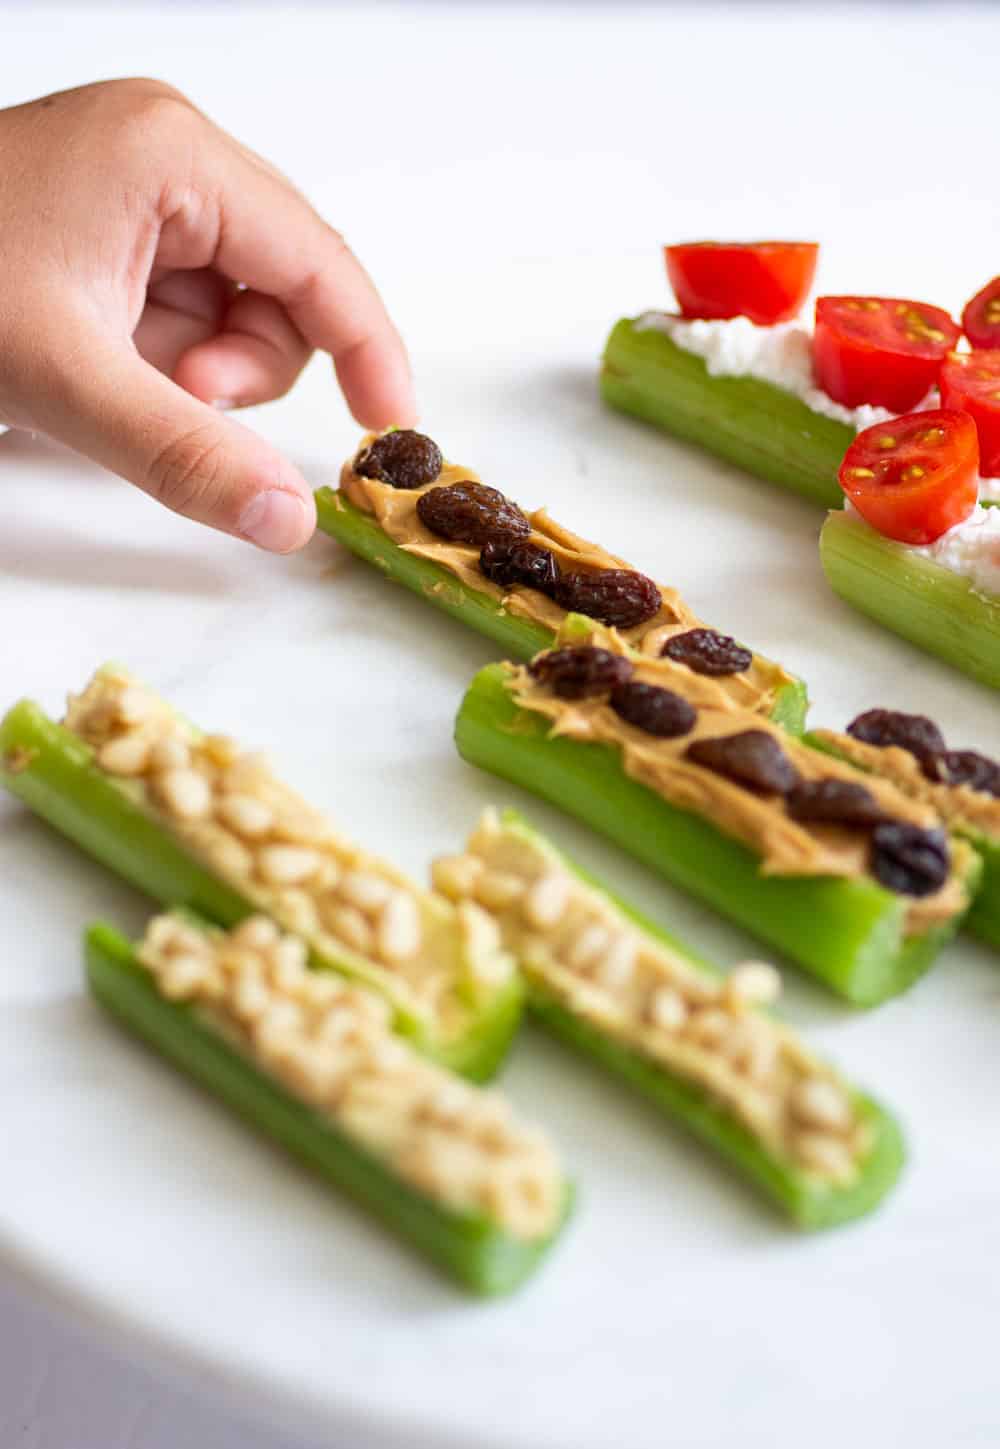 This new and approved Ants on a Log recipe 3 Ways allows both kids and adults to enjoy an easy and healthy snack. Taking only 5 minutes to make, this classic kid snack can be upgraded by switching out the peanut butter and raisins with other healthy spreads and toppings! || The Butter Half #easysnacks #healthysnacks #kidssnacks #antsonalog #thebutterhalf